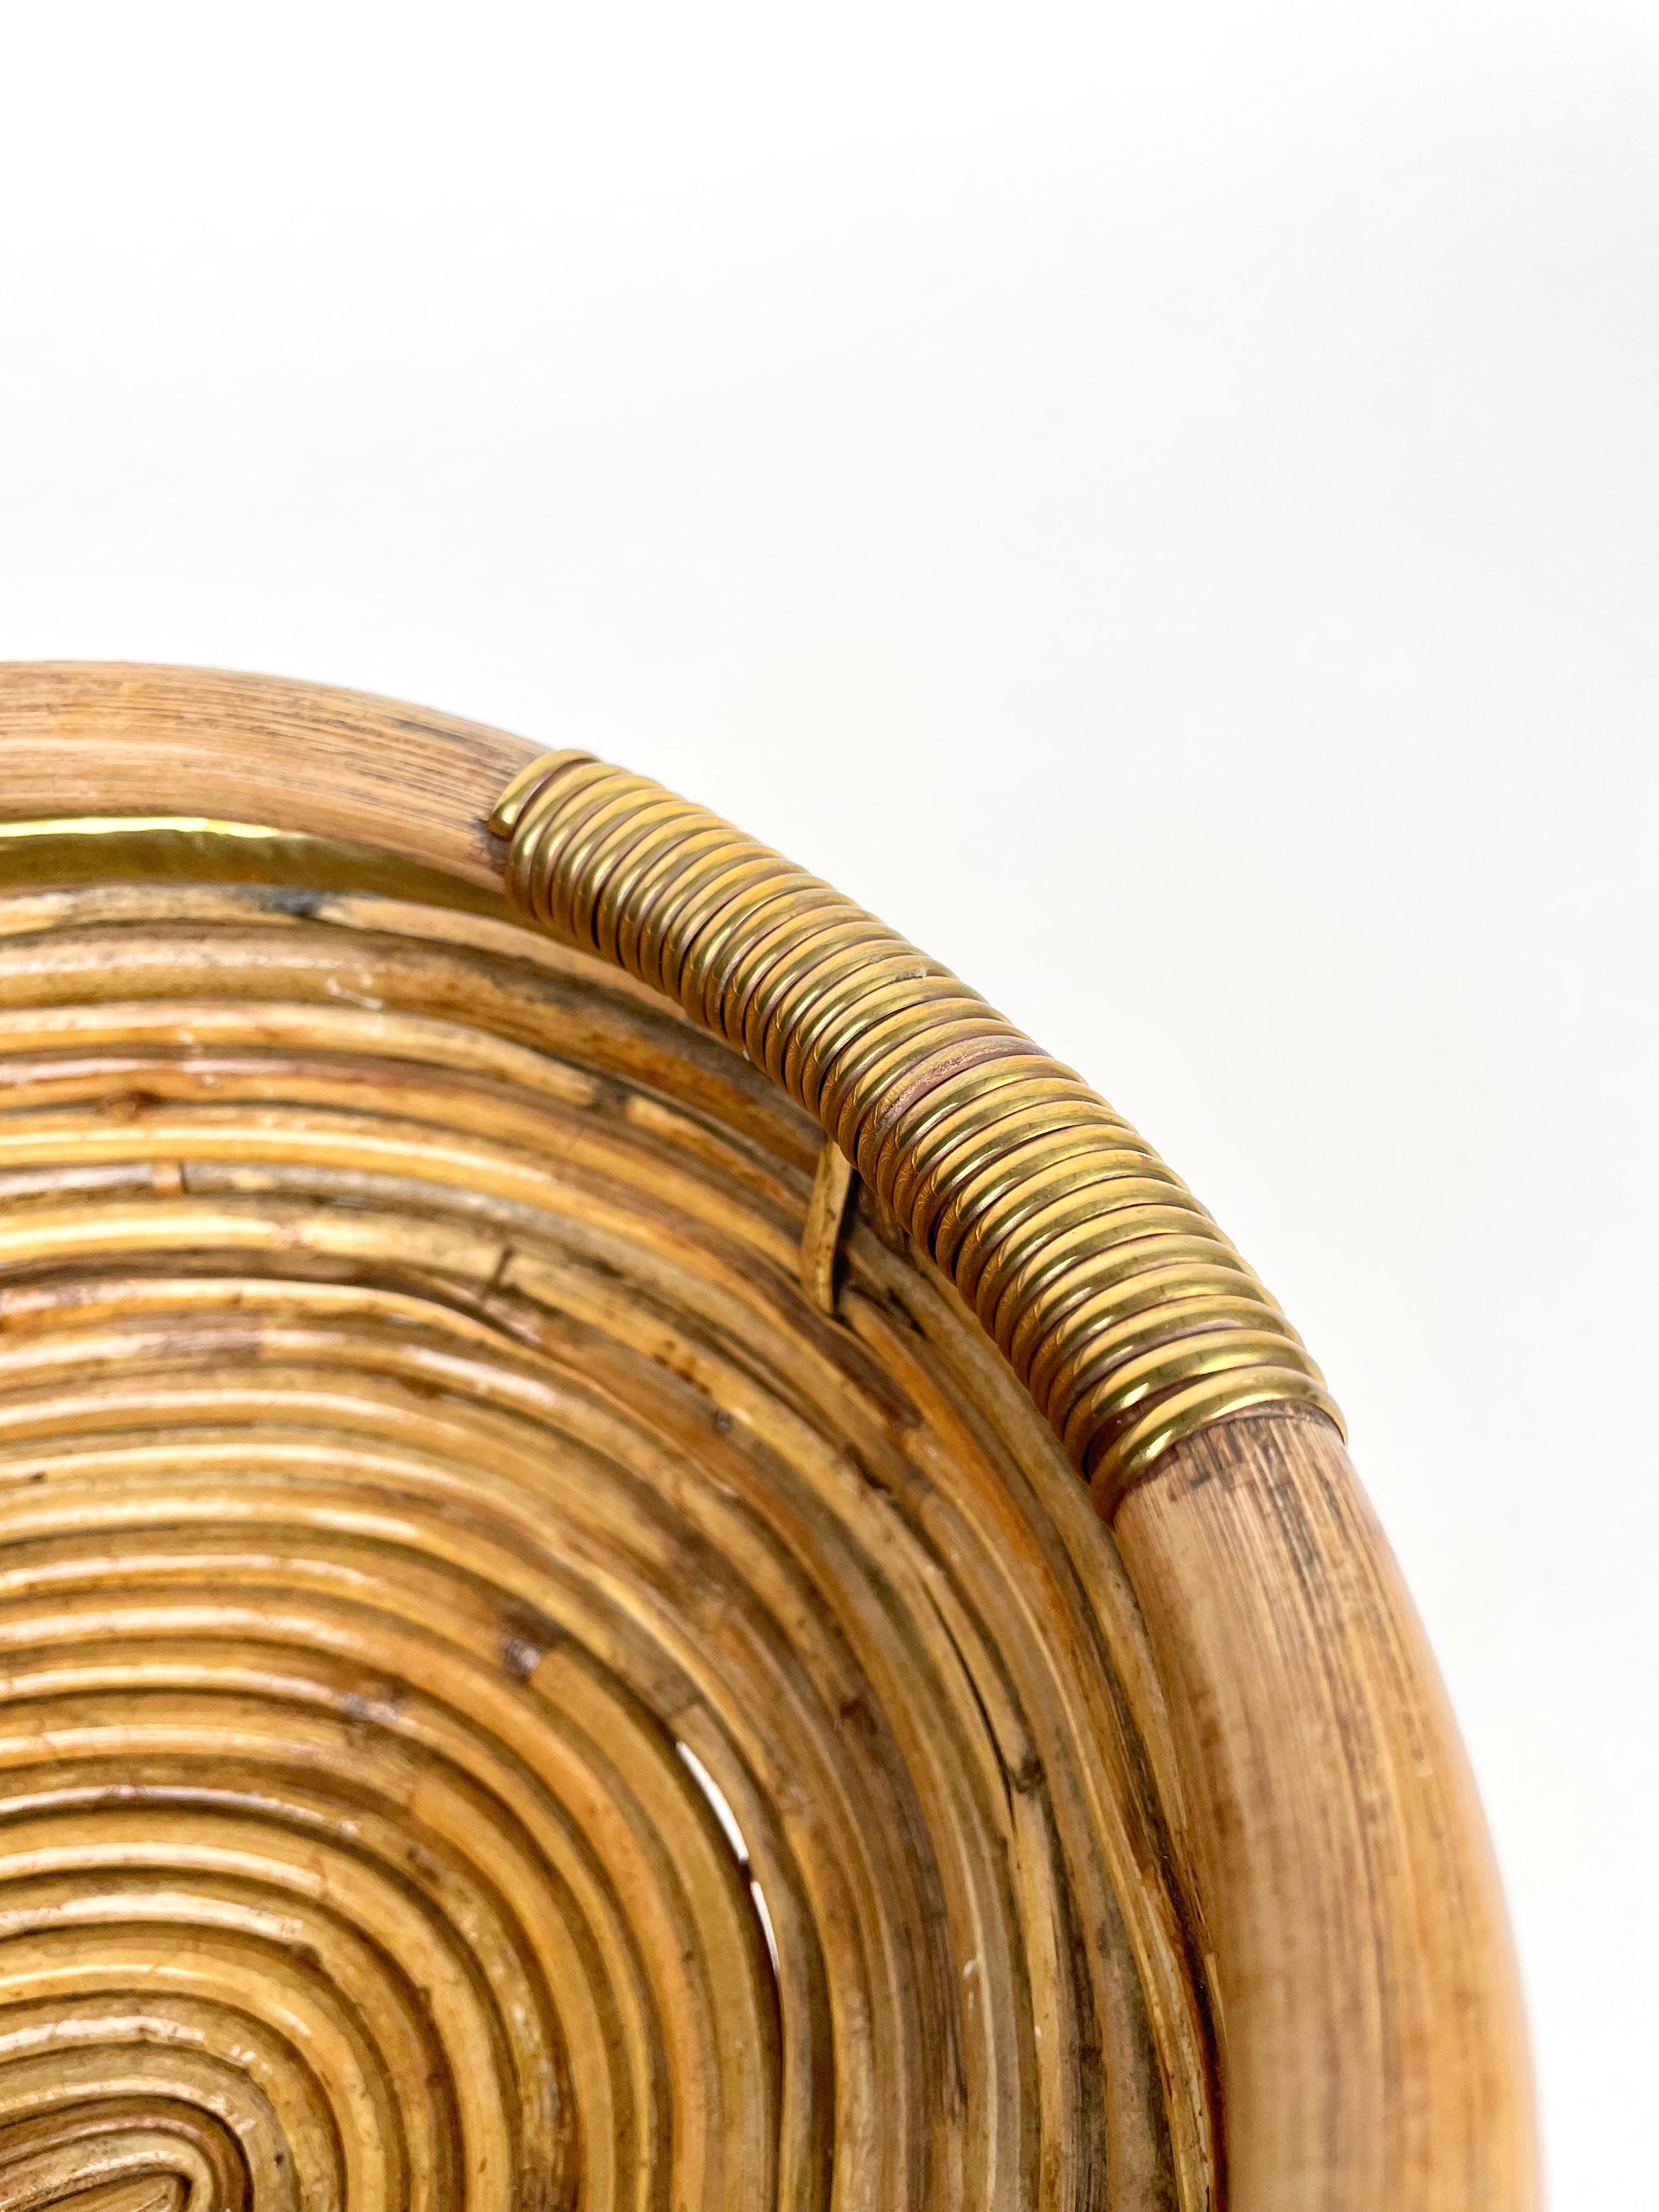 Bamboo and Brass Basket Bowl with Handle, Italy, 1970s For Sale 4